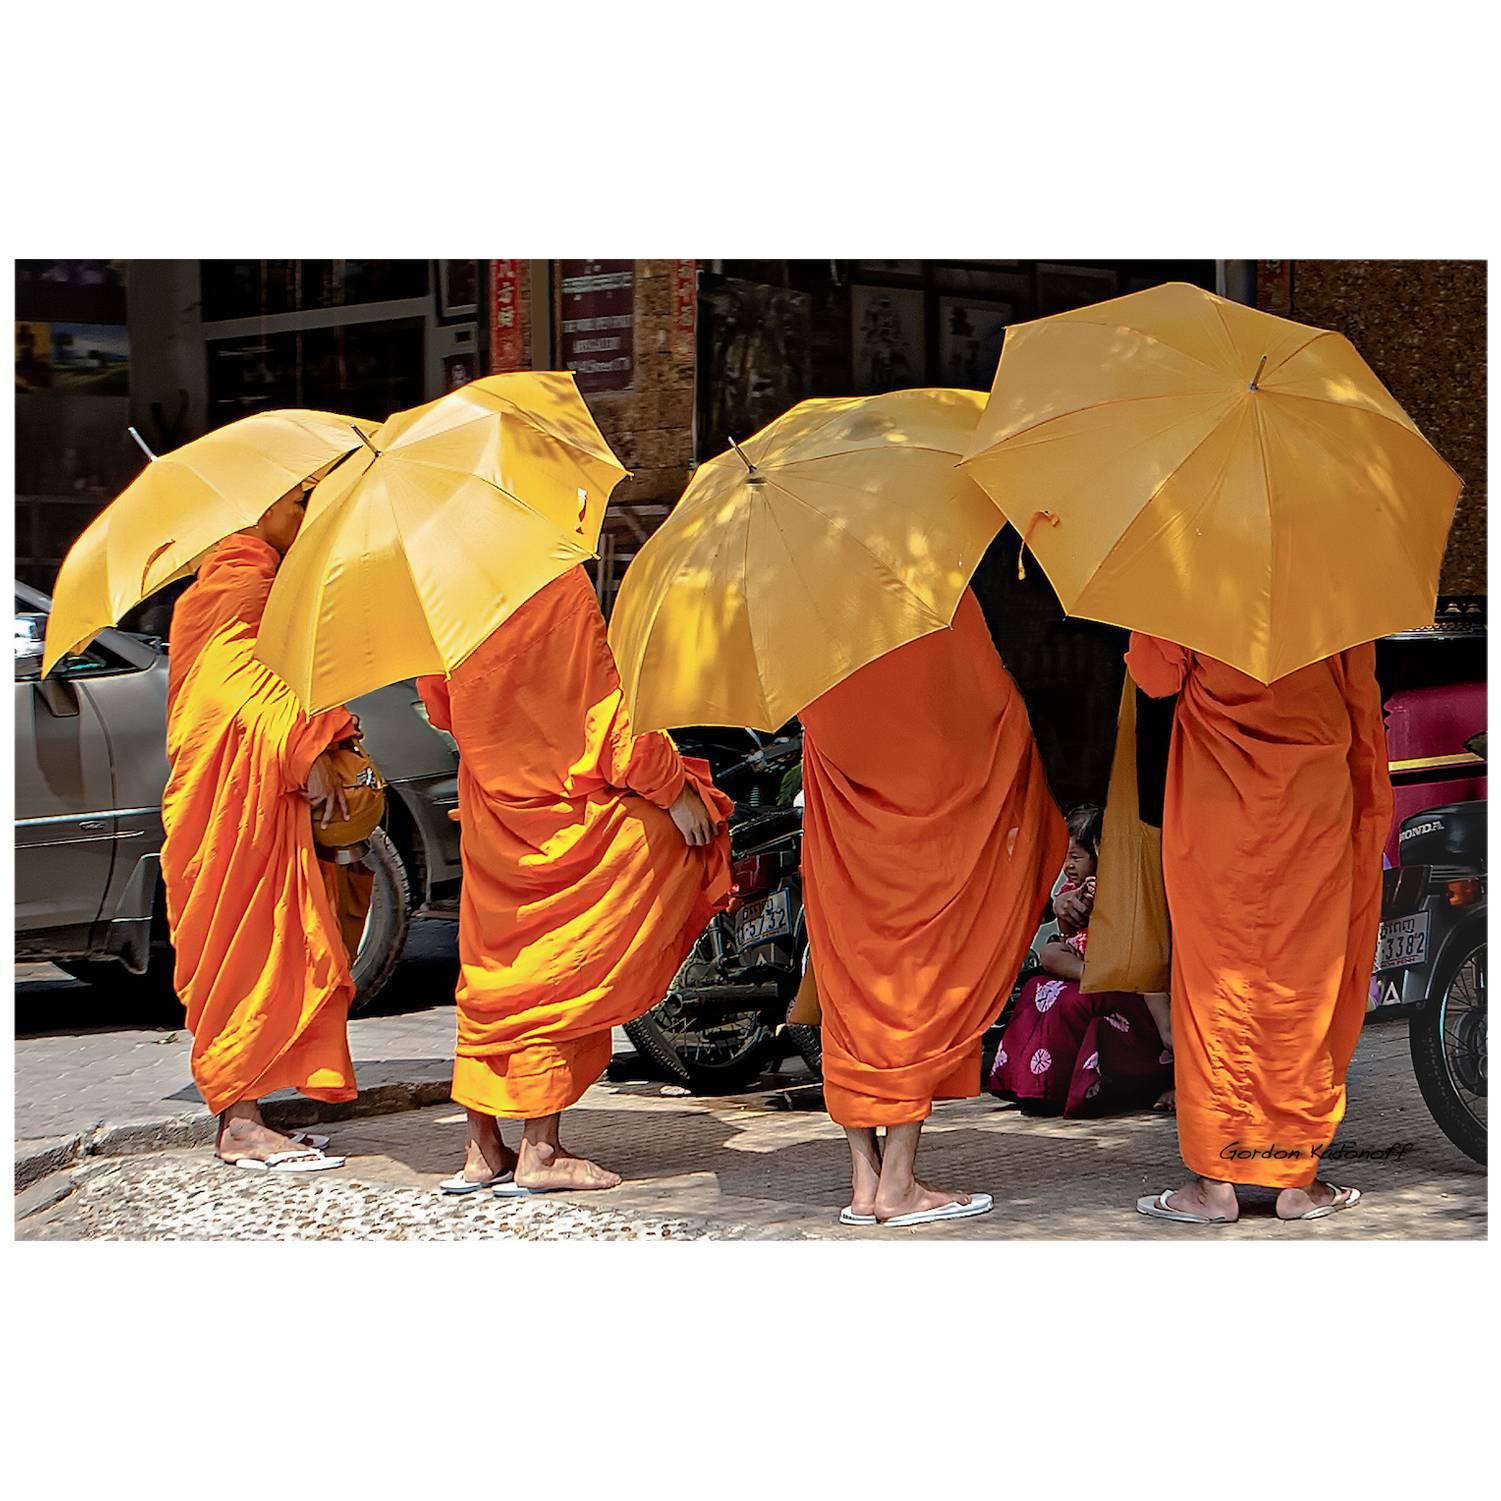 Cambodian Monks Moving on Photograph